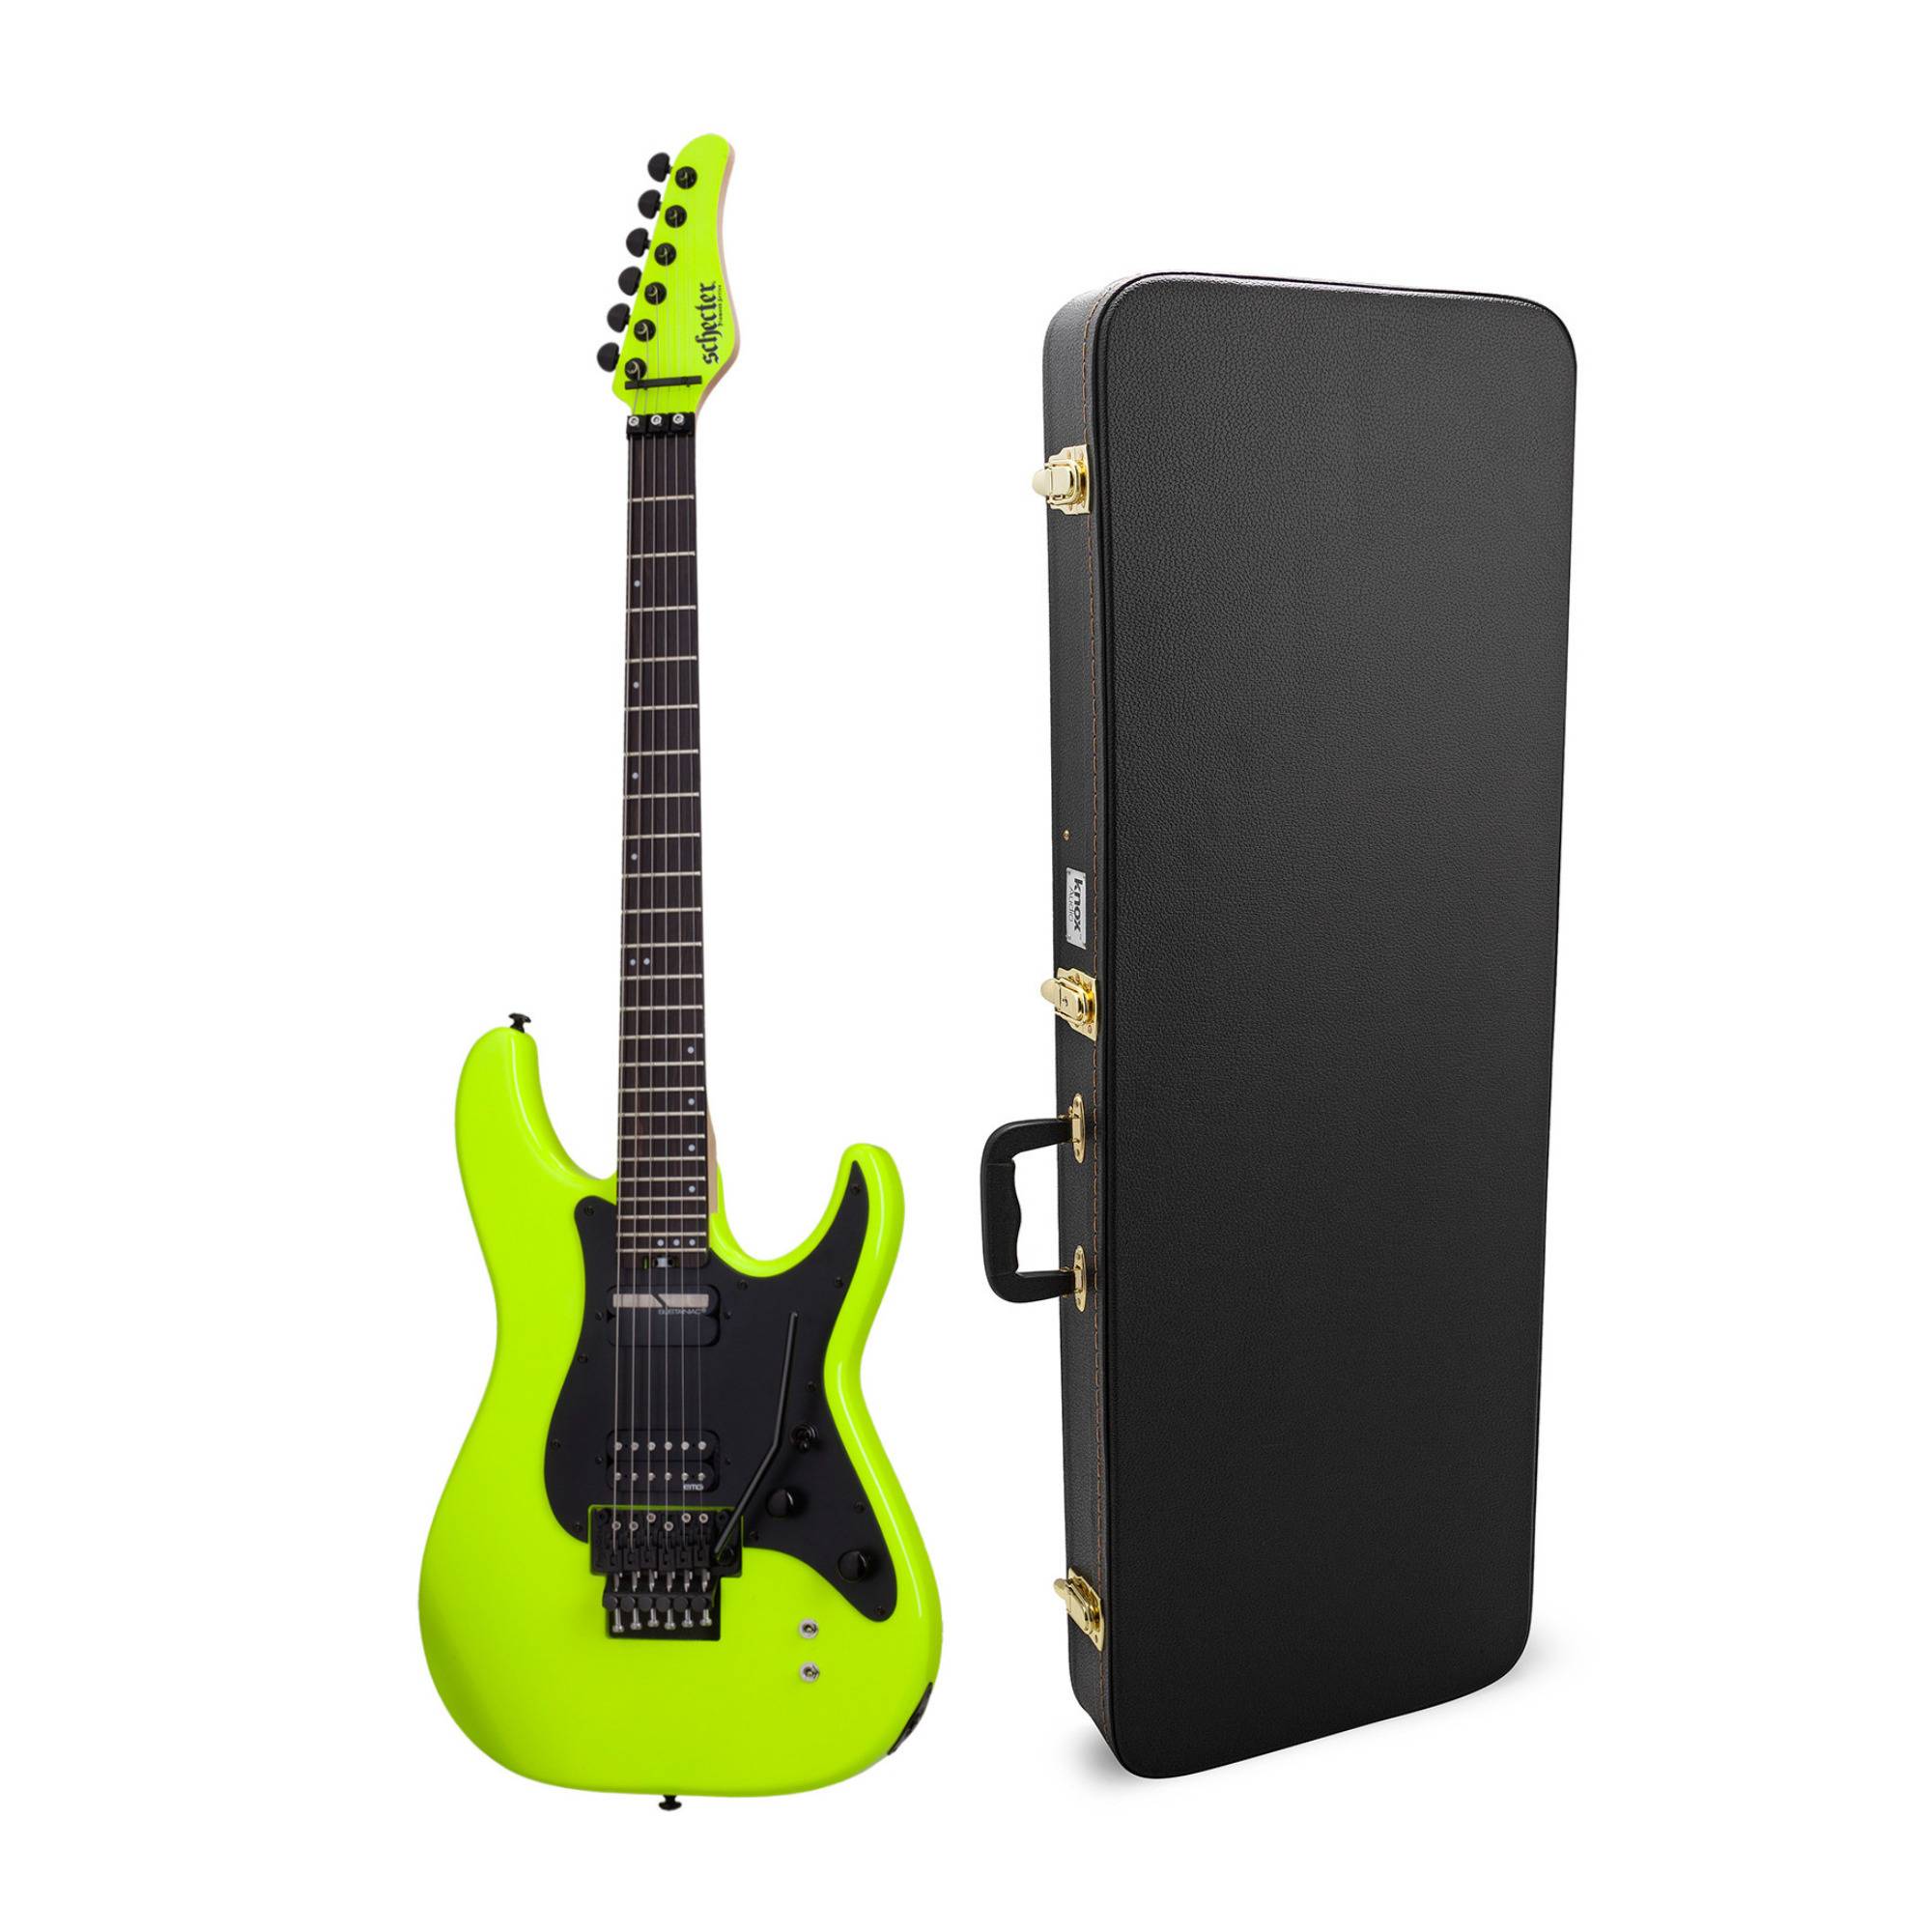 Schecter Sun Valley Super Shredder FR S 6-String Electric Guitar in Birch Green with Hard Shell Case